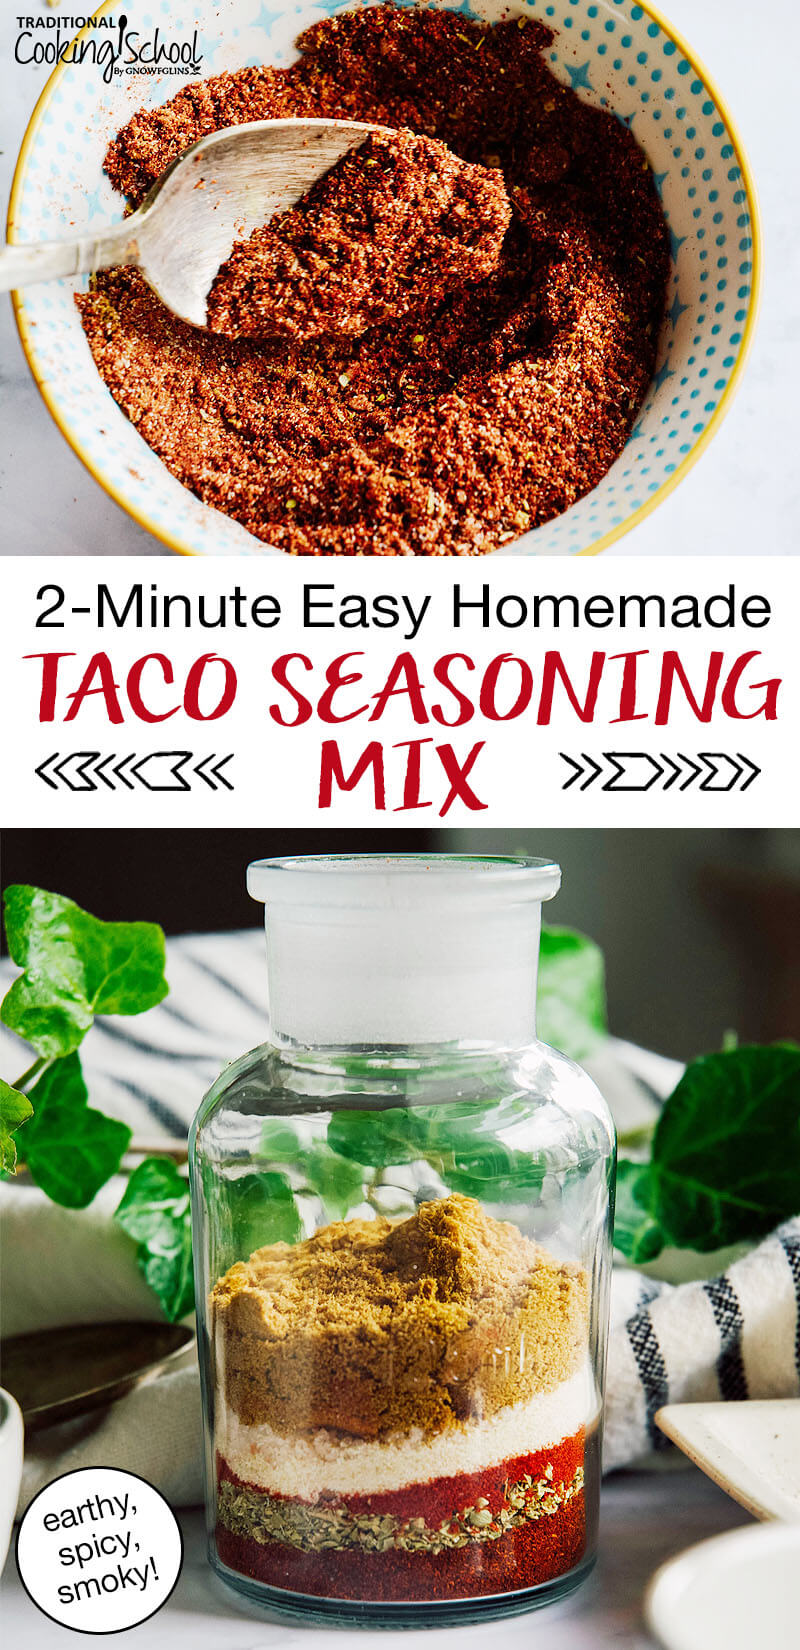 photo collage of taco seasoning mix, including a photo of mixing all the spices together in a small bowl, and the spices layered together in a small glass vial, with text overlay: "2-Minute Easy Homemade Taco Seasoning Mix (earthy, spicy, smoky!)"